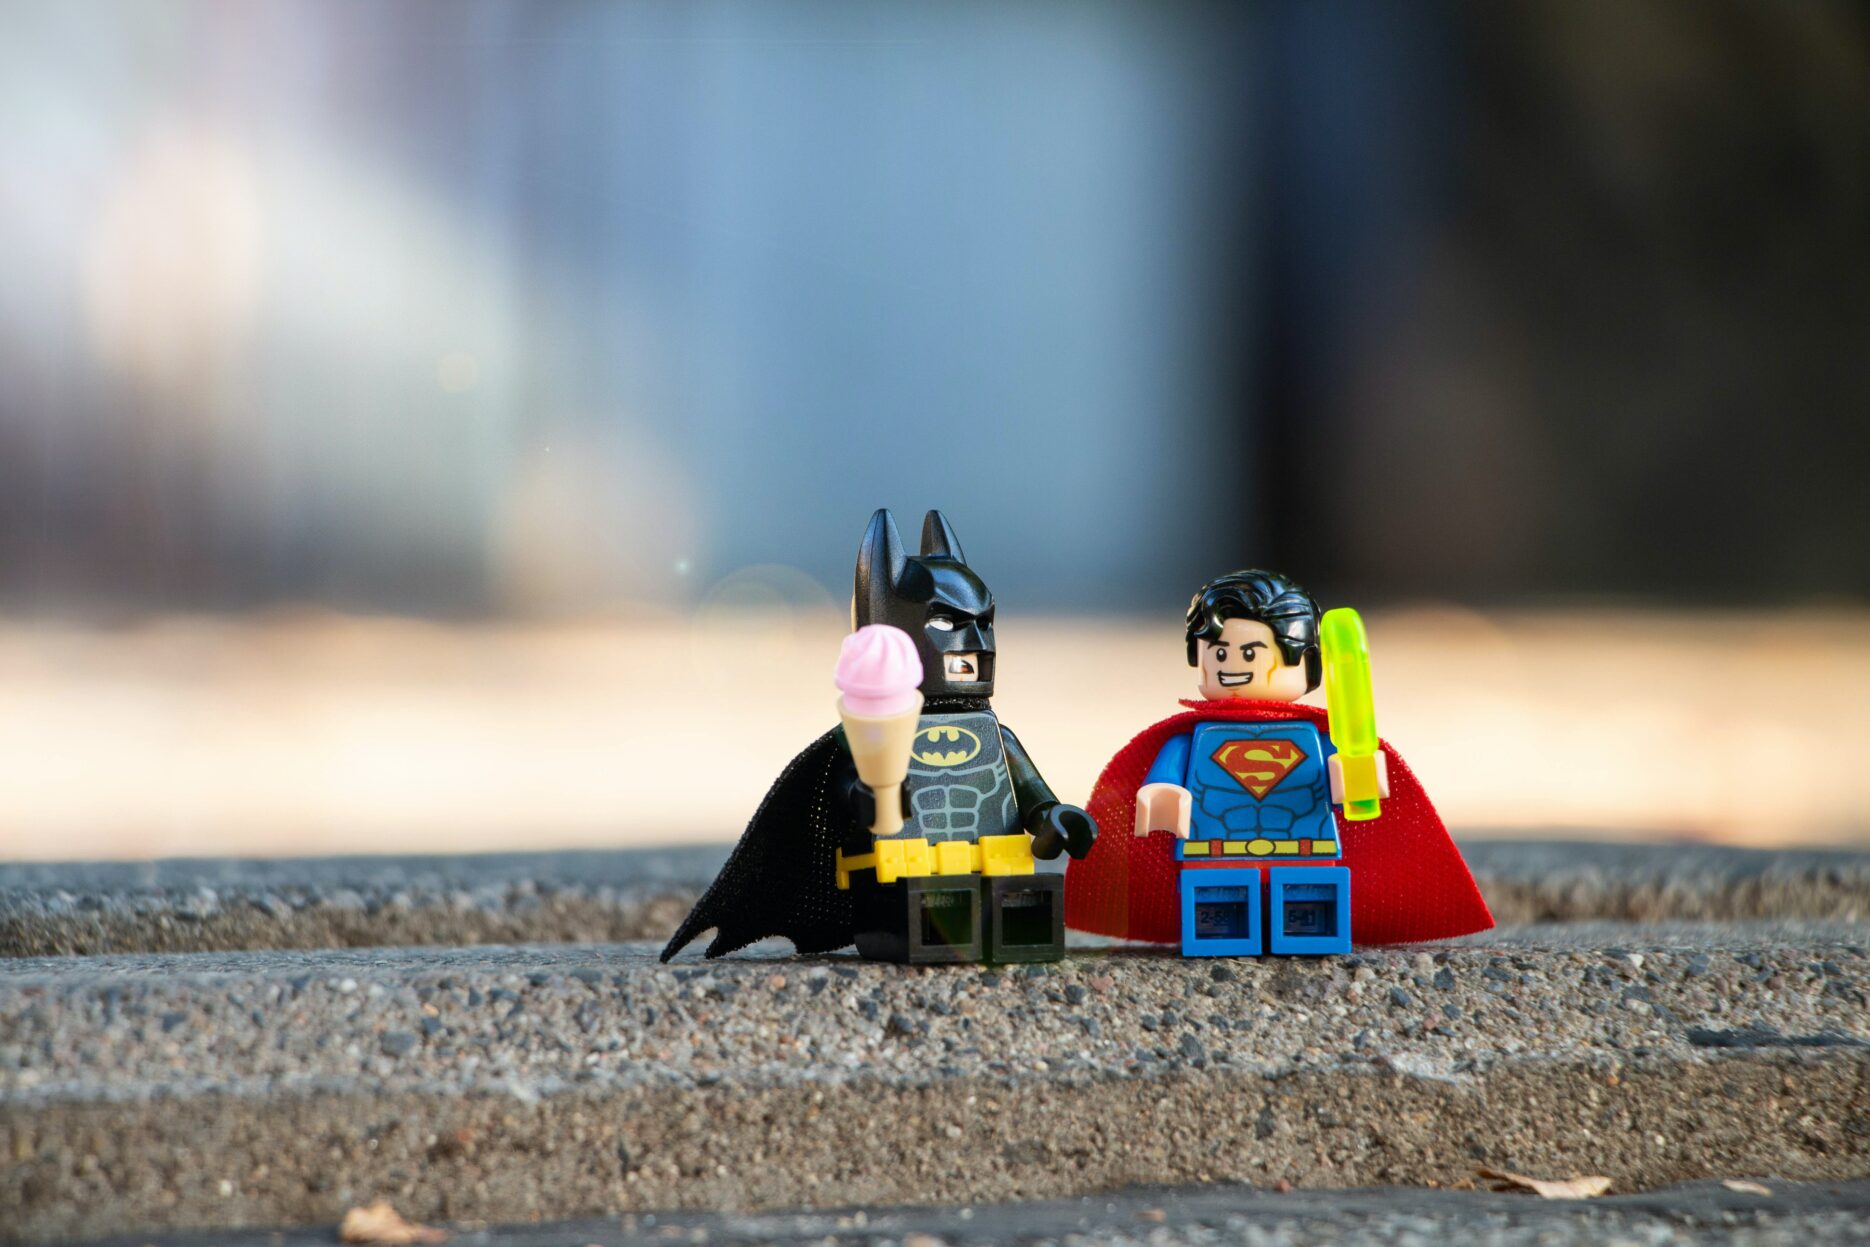 Lego versions of Batman and Superman sit on the pavement eating ice cream.